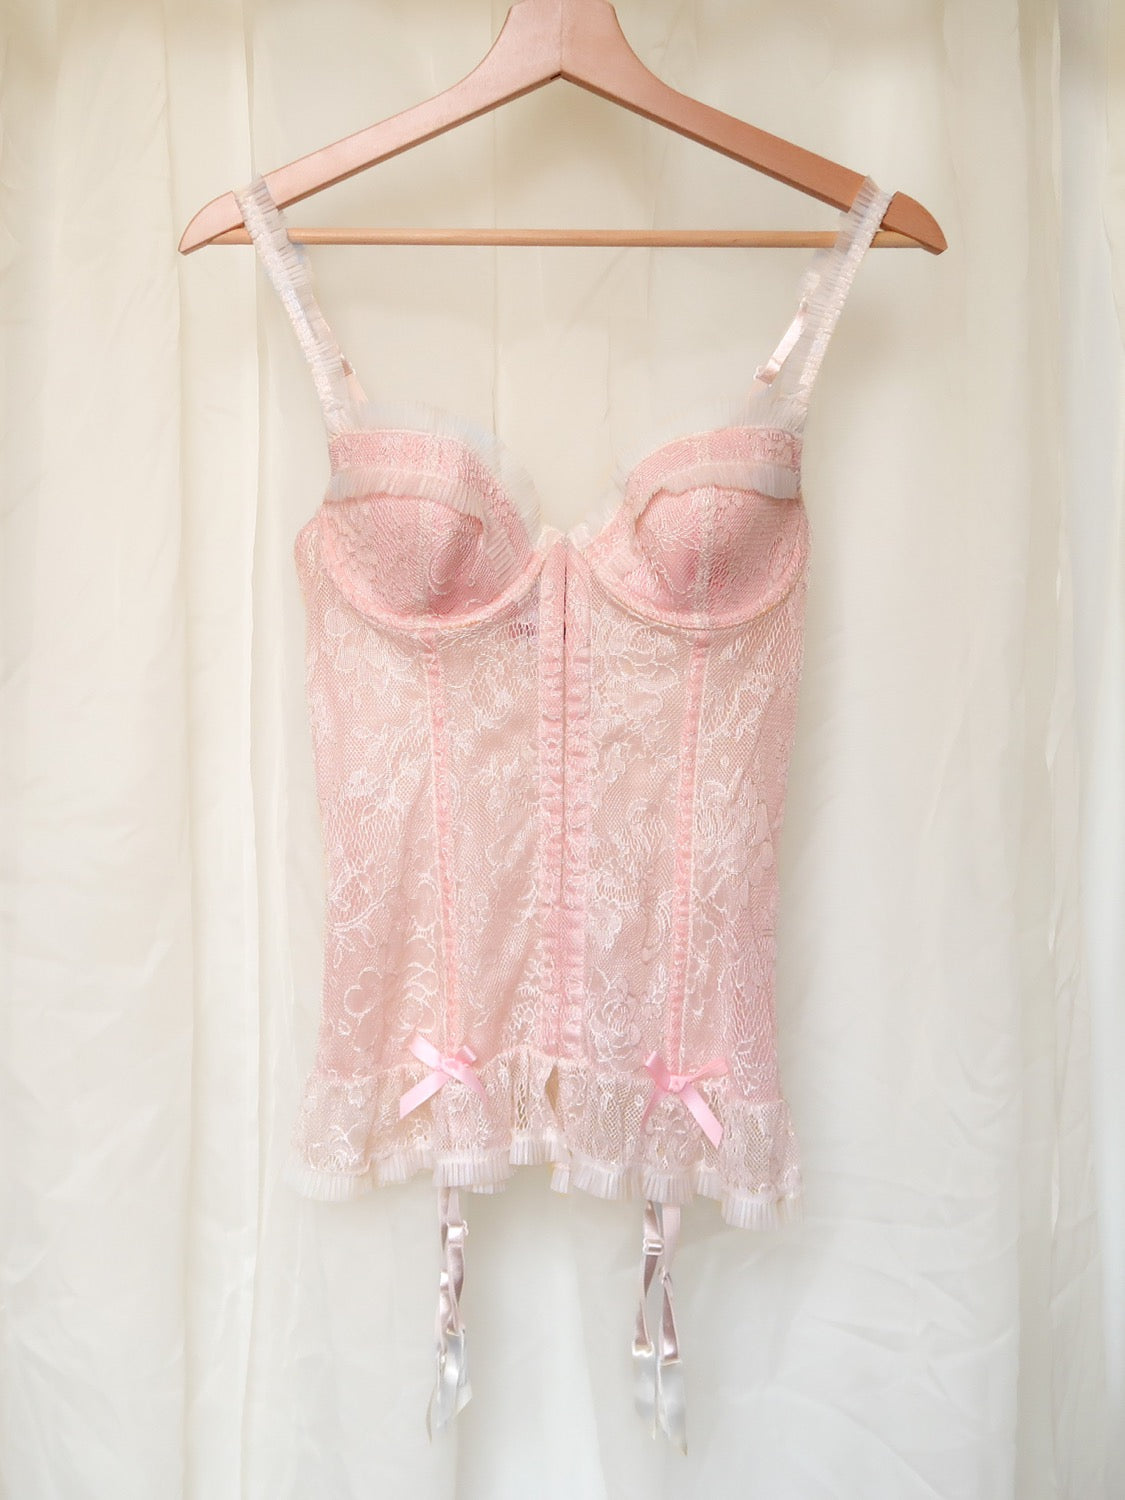 VS '00s BABYDOLL BUSTIER RUFFLED LACE TOP IN PINK - (34C/36B/32D +  36C/34D/38B)